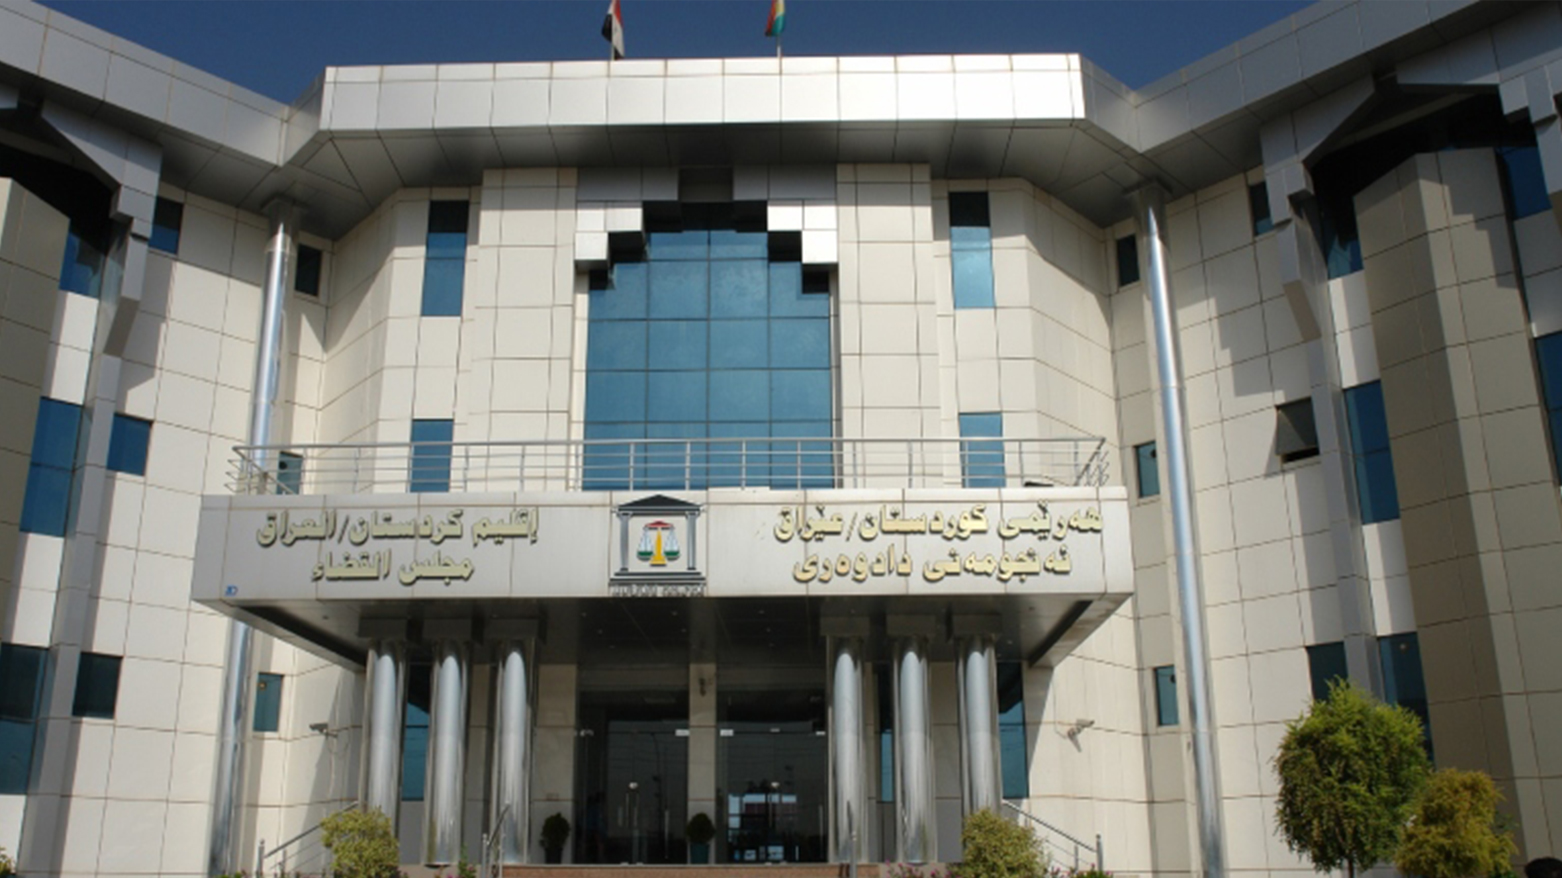 The headquarters of the Judicial Council of Kurdistan Region. (Photo: The Judicial Council of Kurdistan Region)